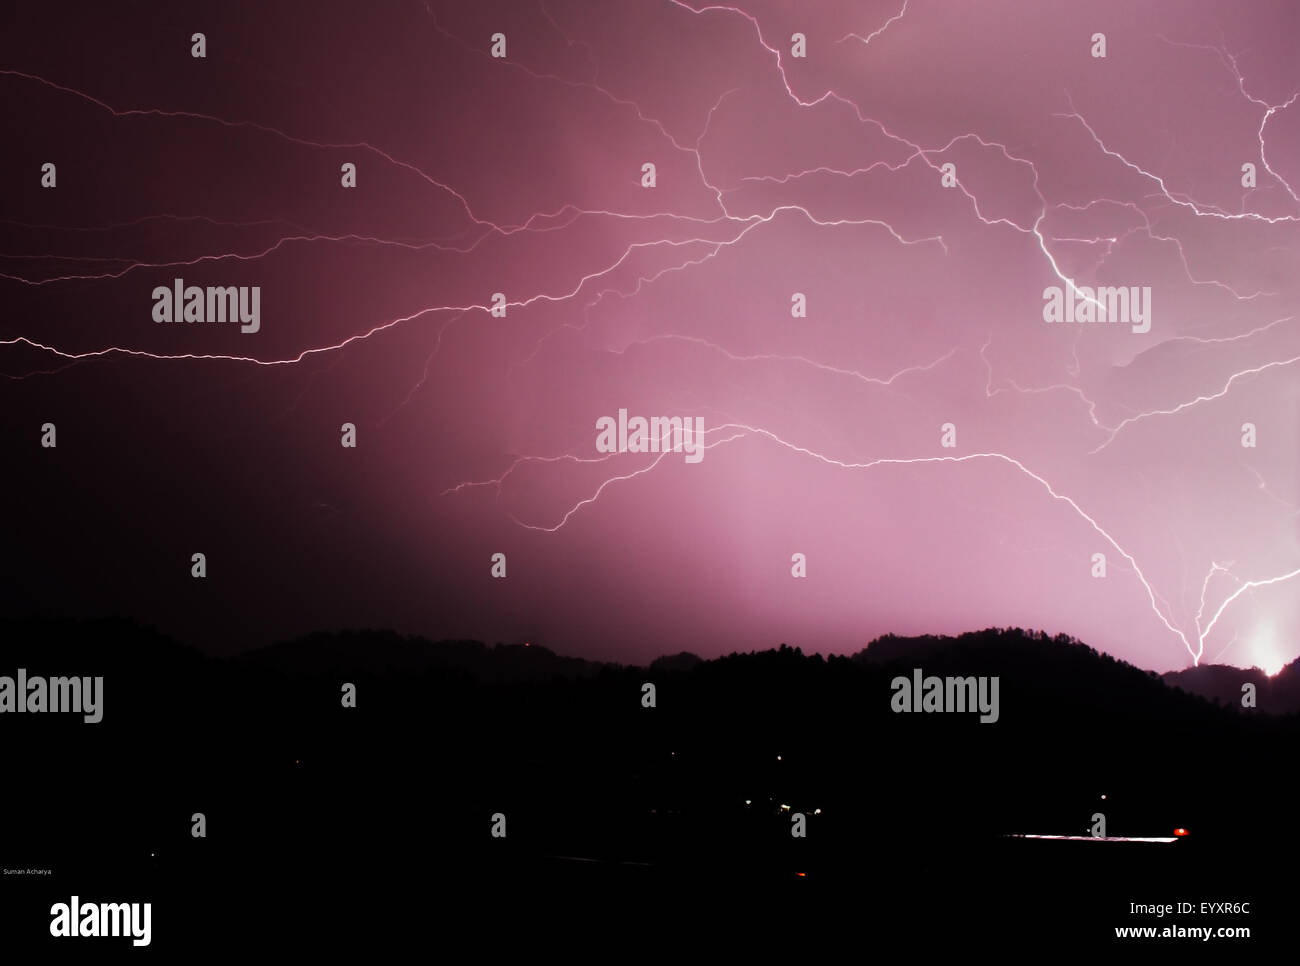 Almighty Sky. thunderstorms in a hilly highland region Stock Photo